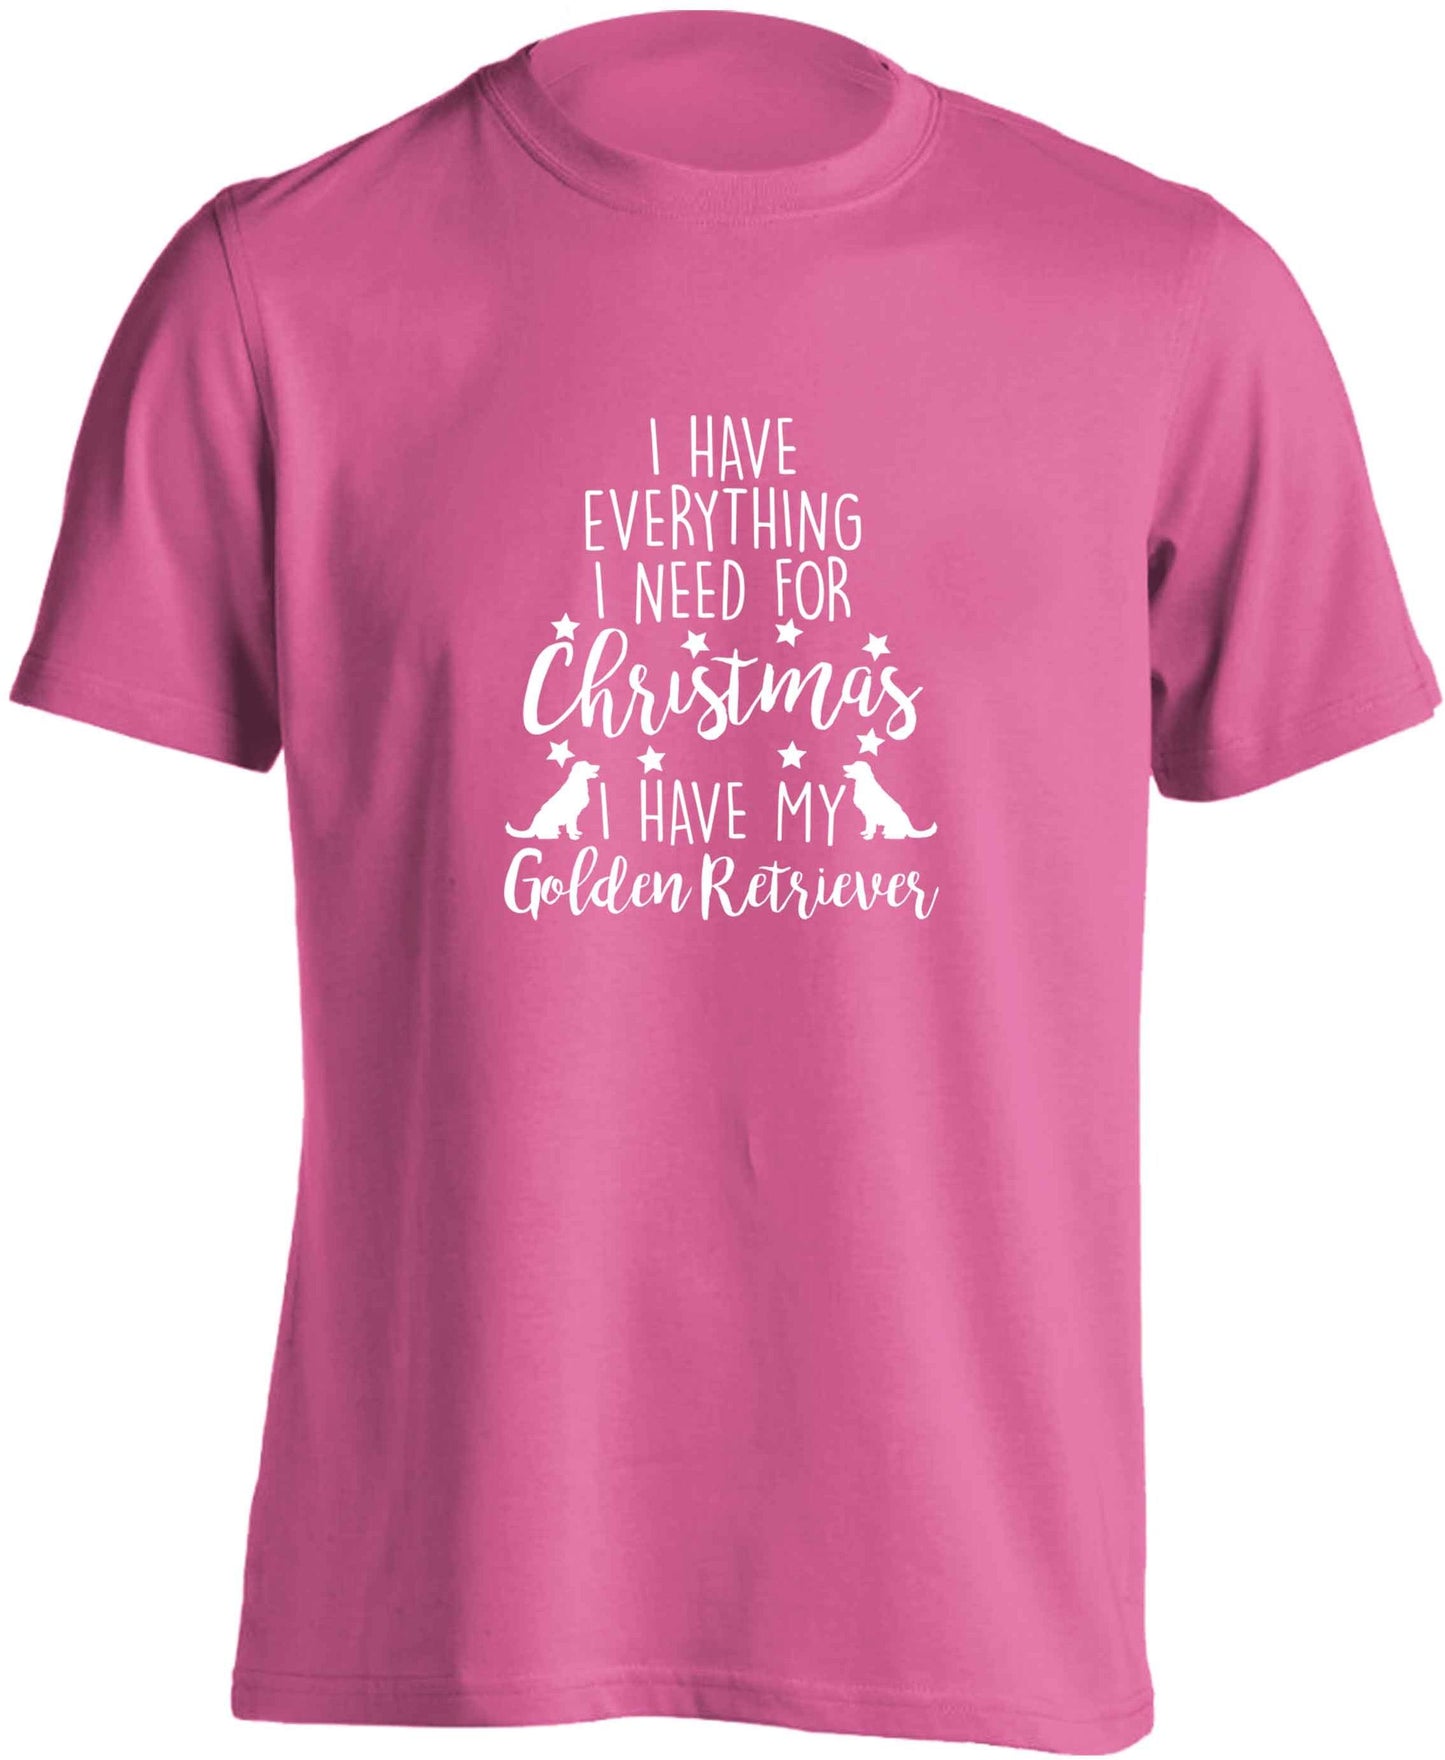 I have everything I need for Christmas I have my golden retriever adults unisex pink Tshirt 2XL